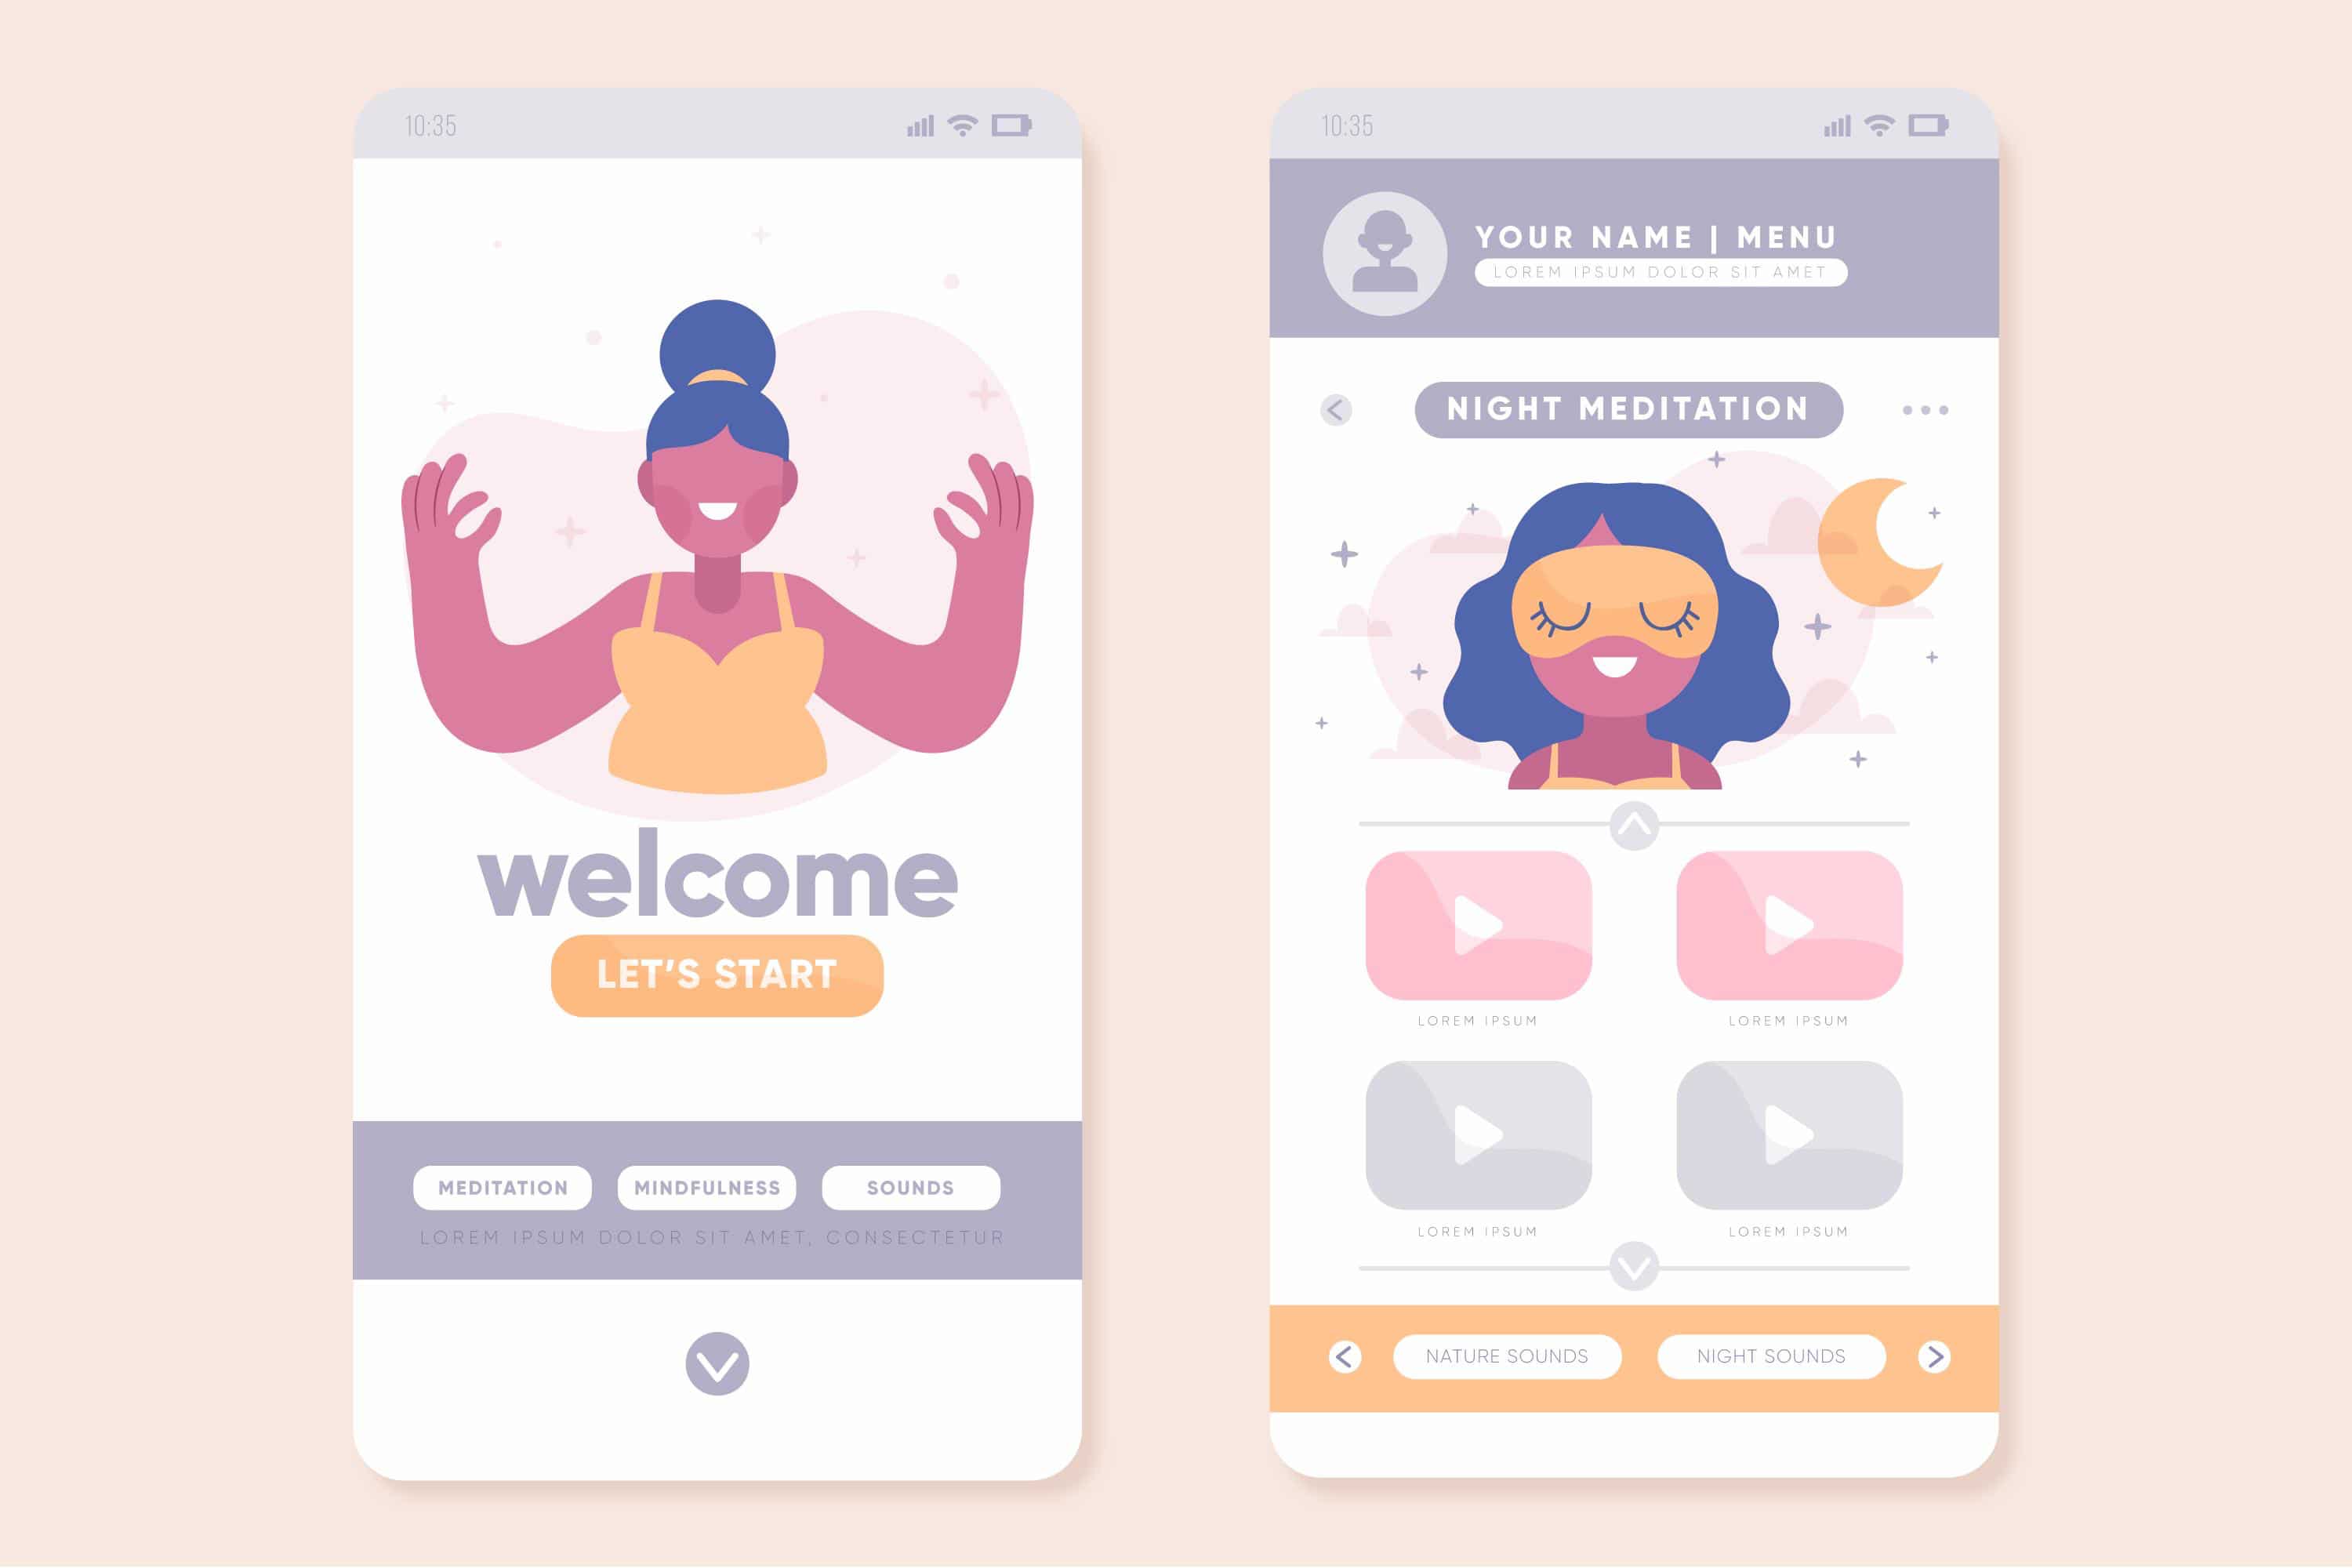 mockups from a welcome onboarding pages.